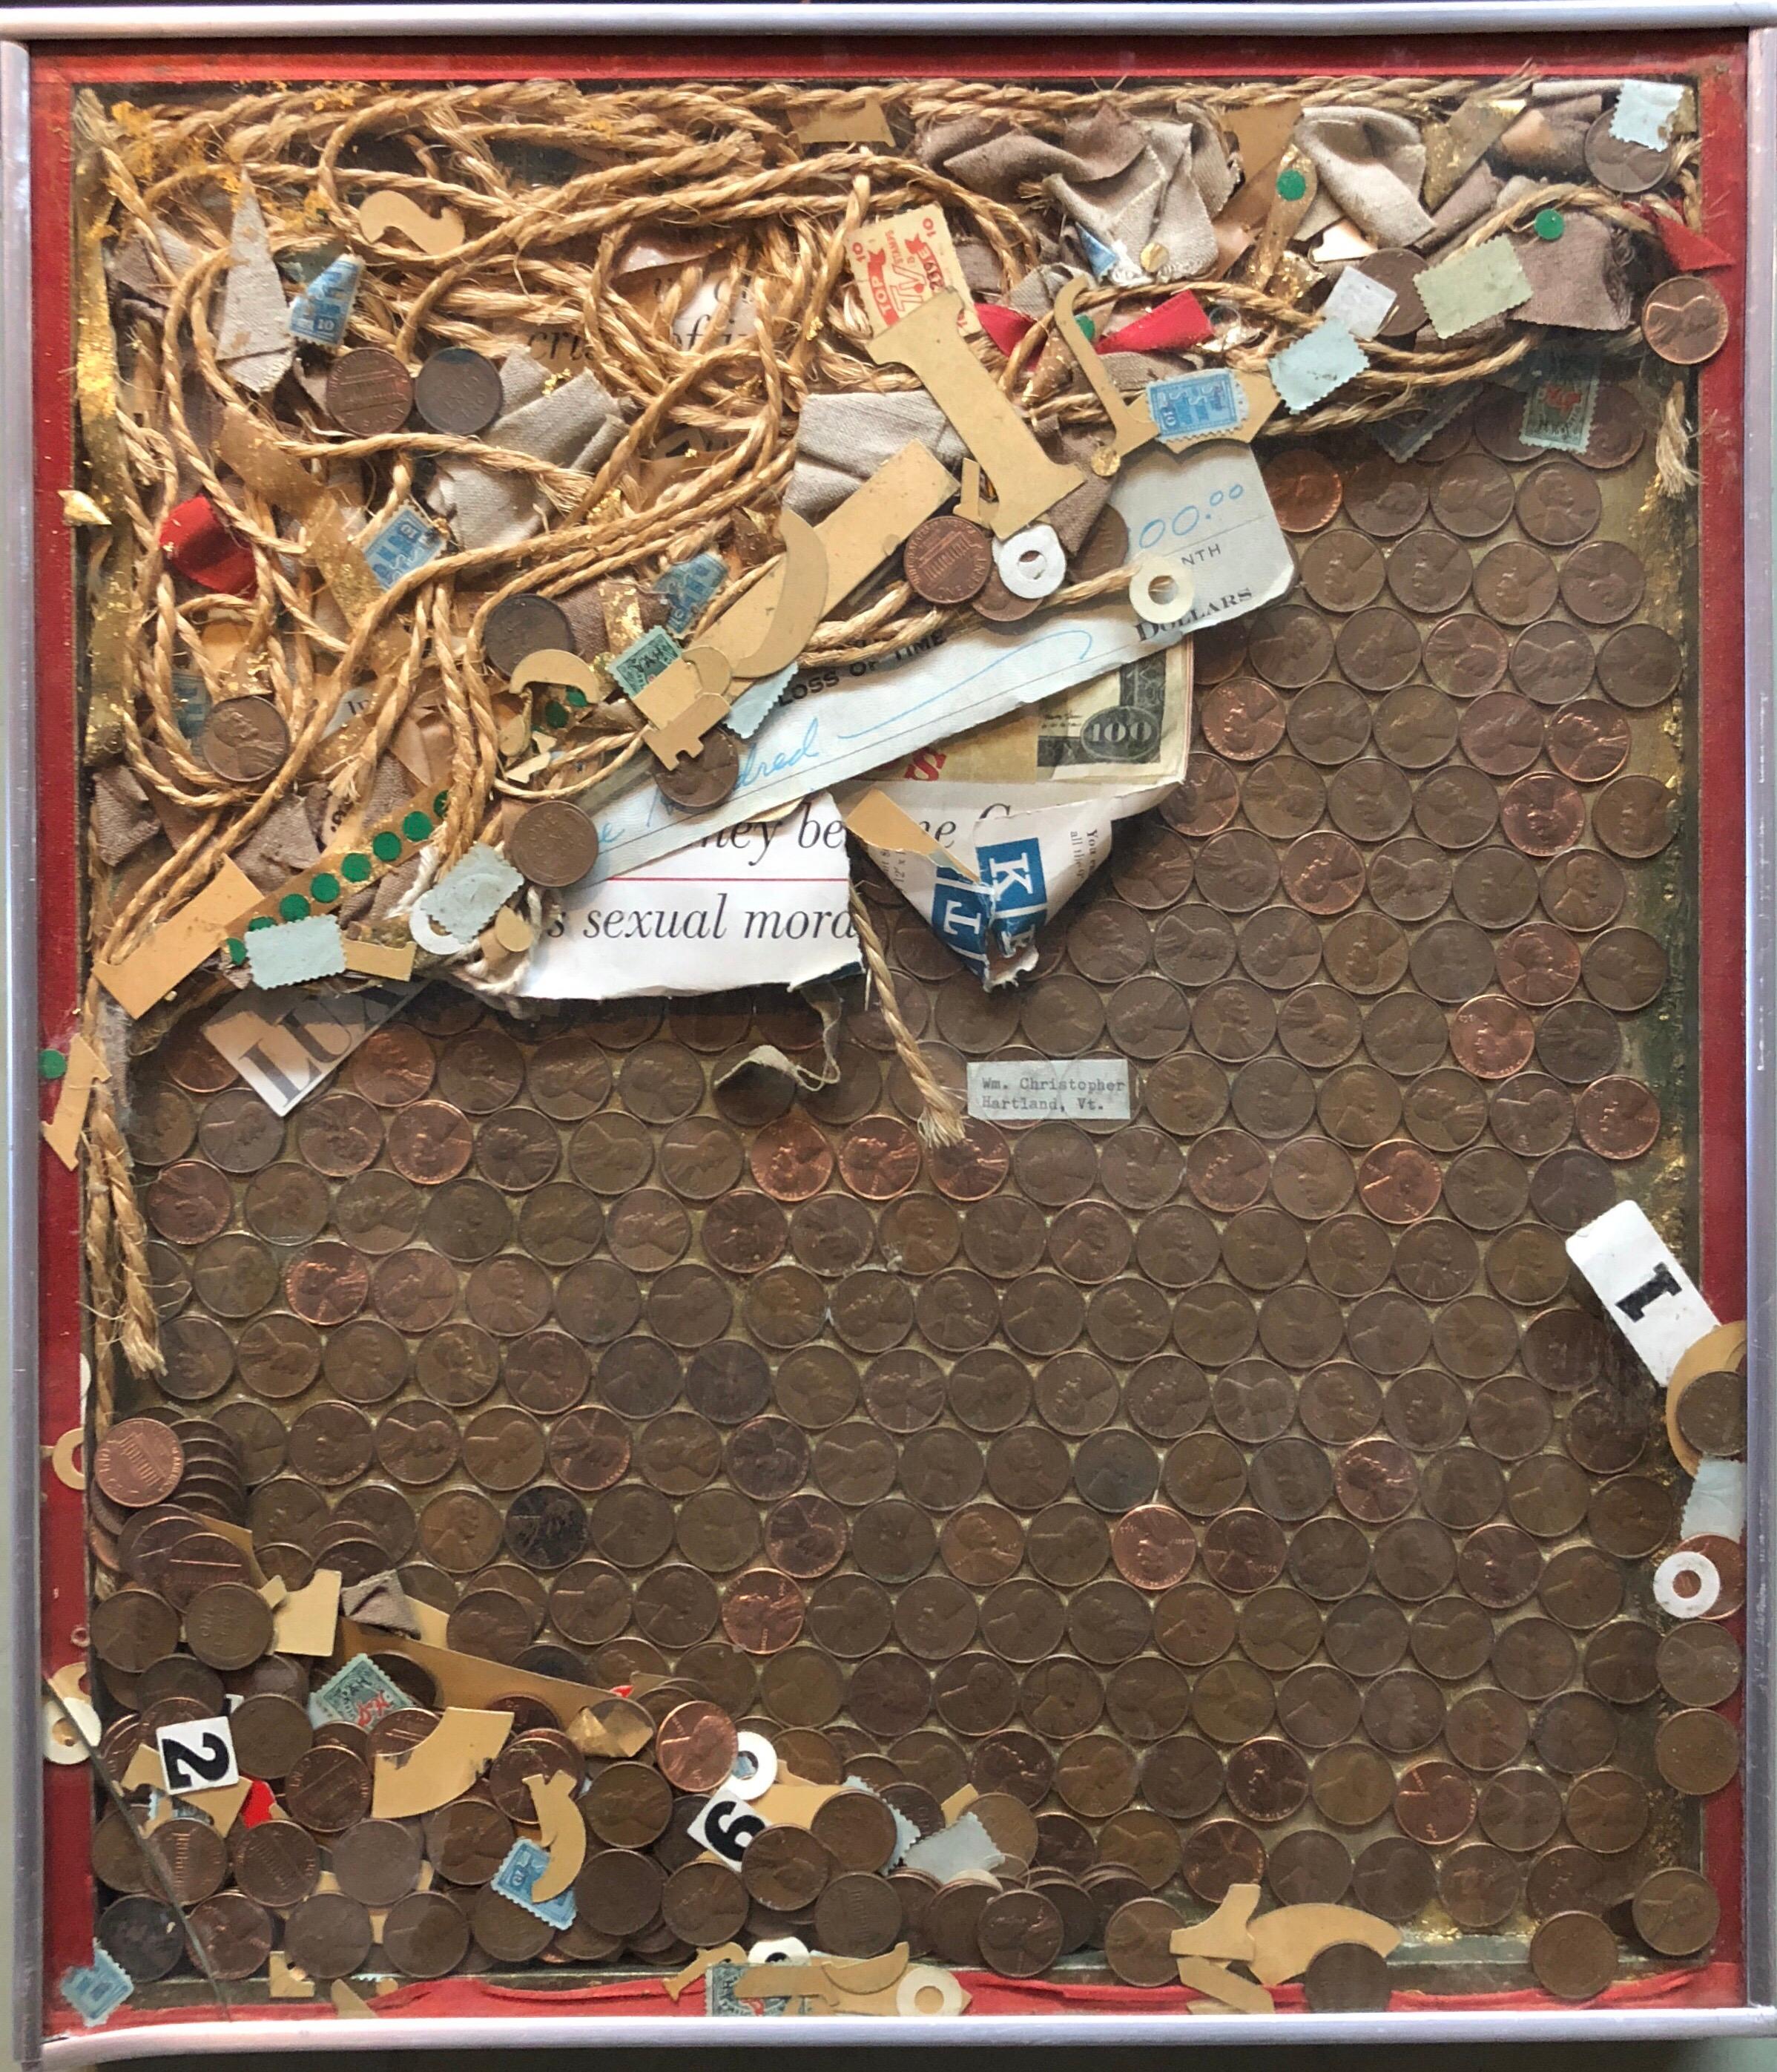 William R. Christopher Abstract Sculpture - Assemblage Collage Painting/Sculpture with Pennies and Scrap Civil Rights Artist